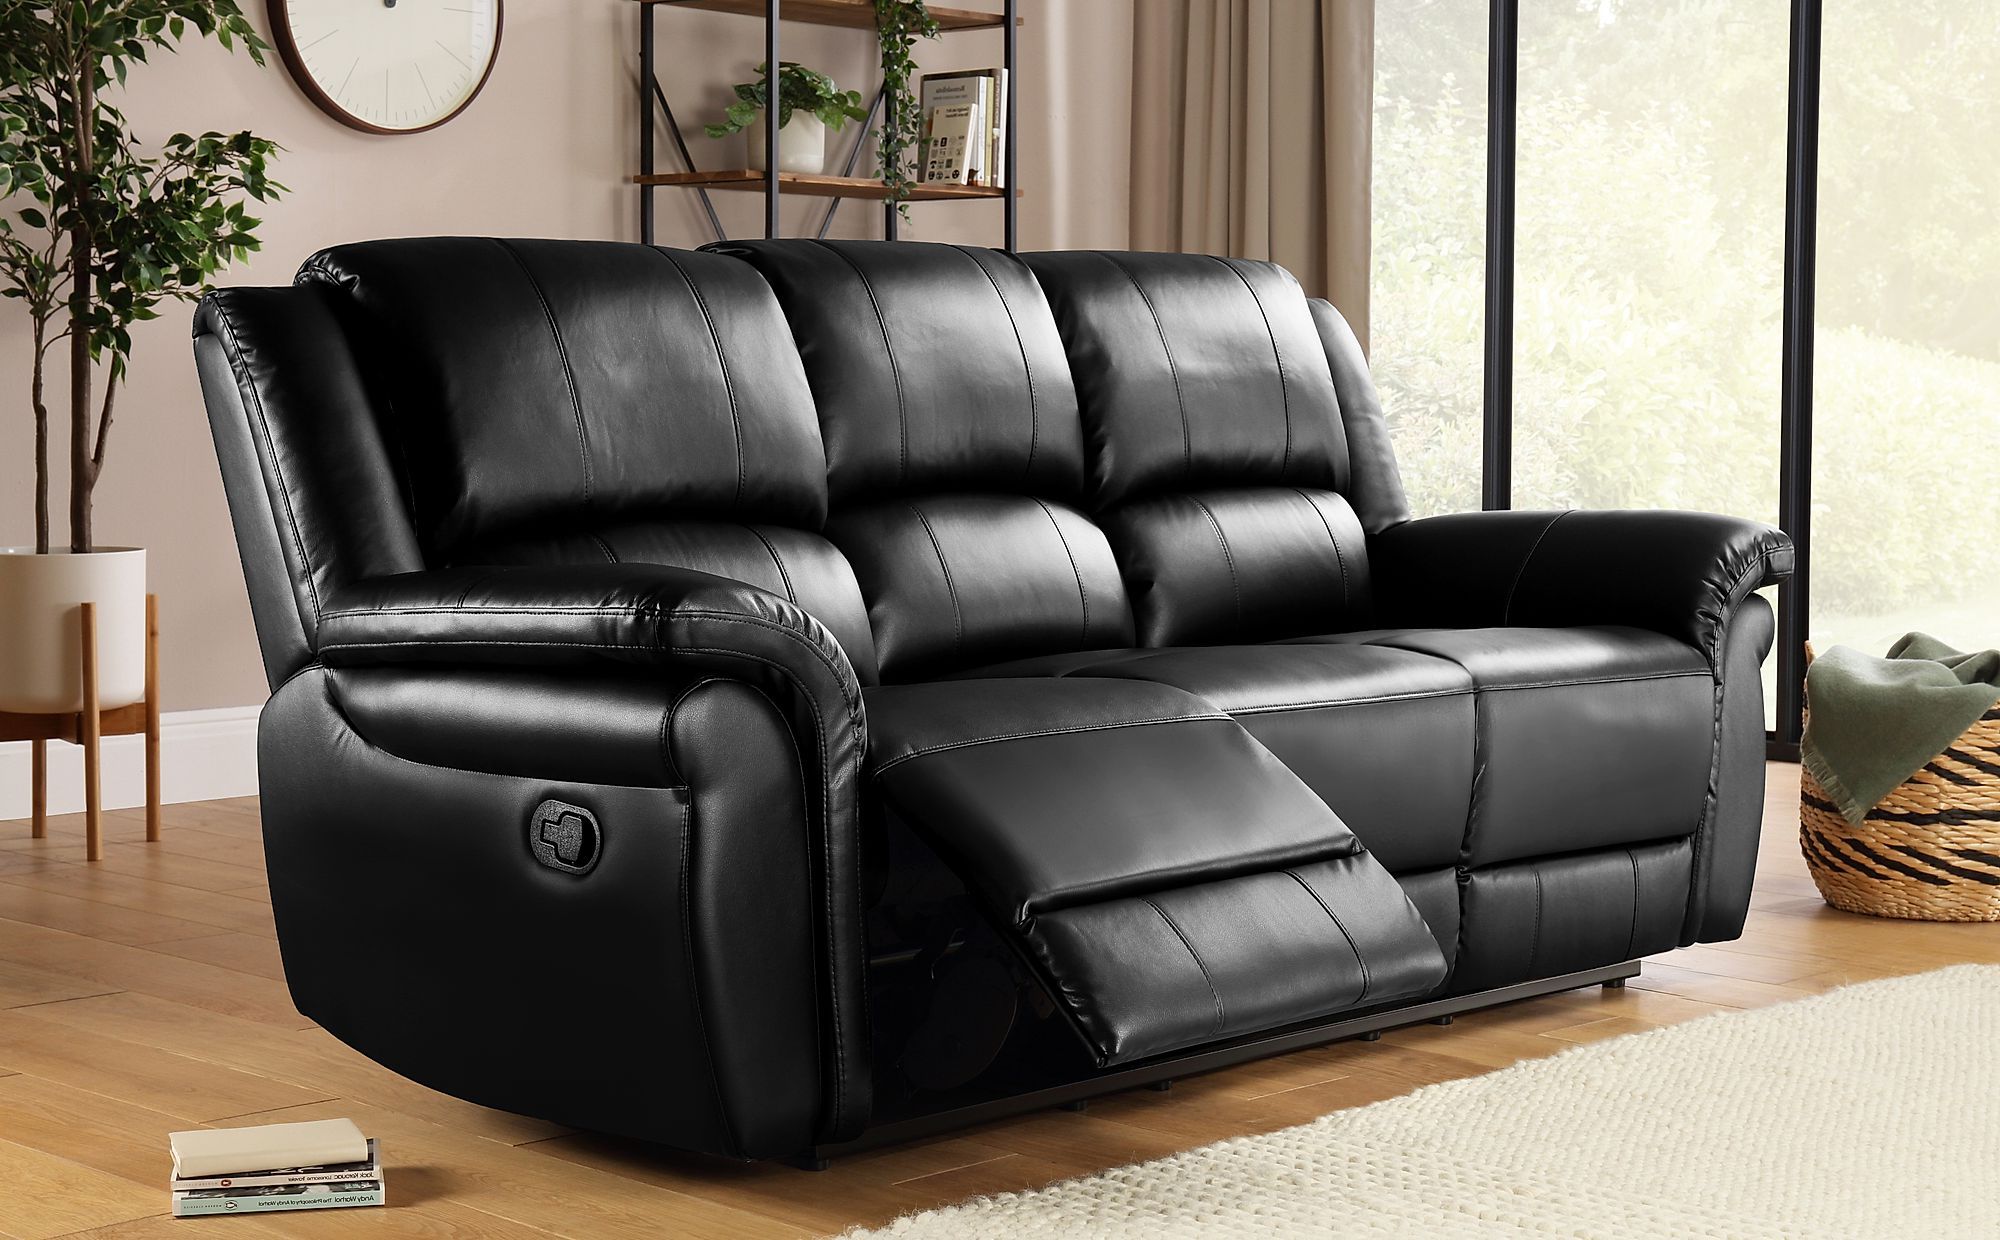 Lombard Black Leather 3 Seater Recliner Sofa (View 7 of 15)